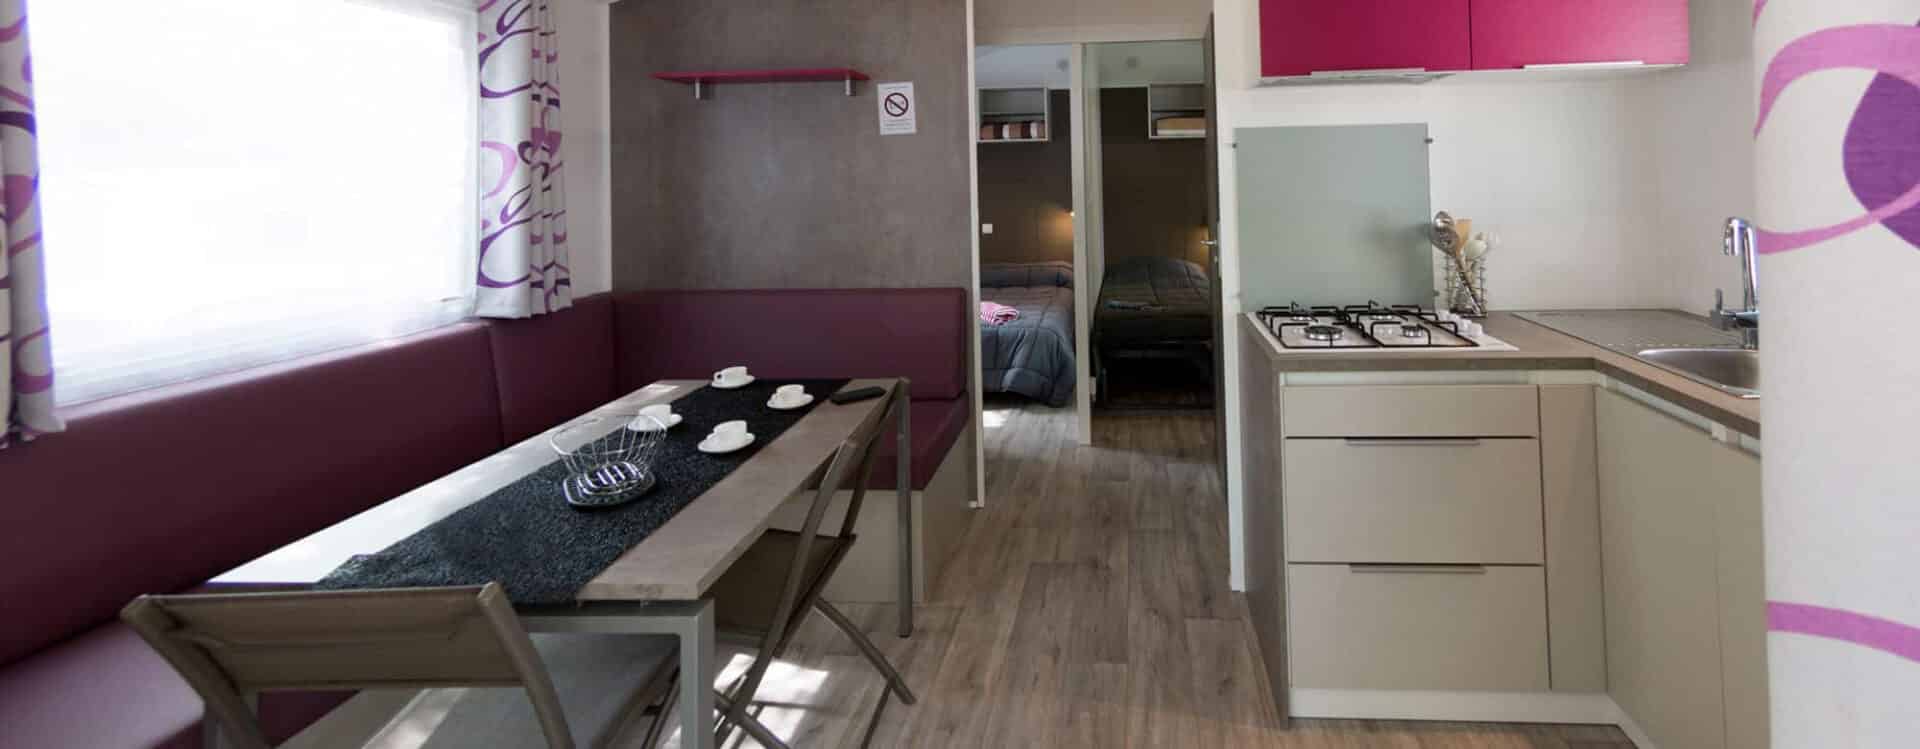 Location mobilhome 6 personnes 3 chambres